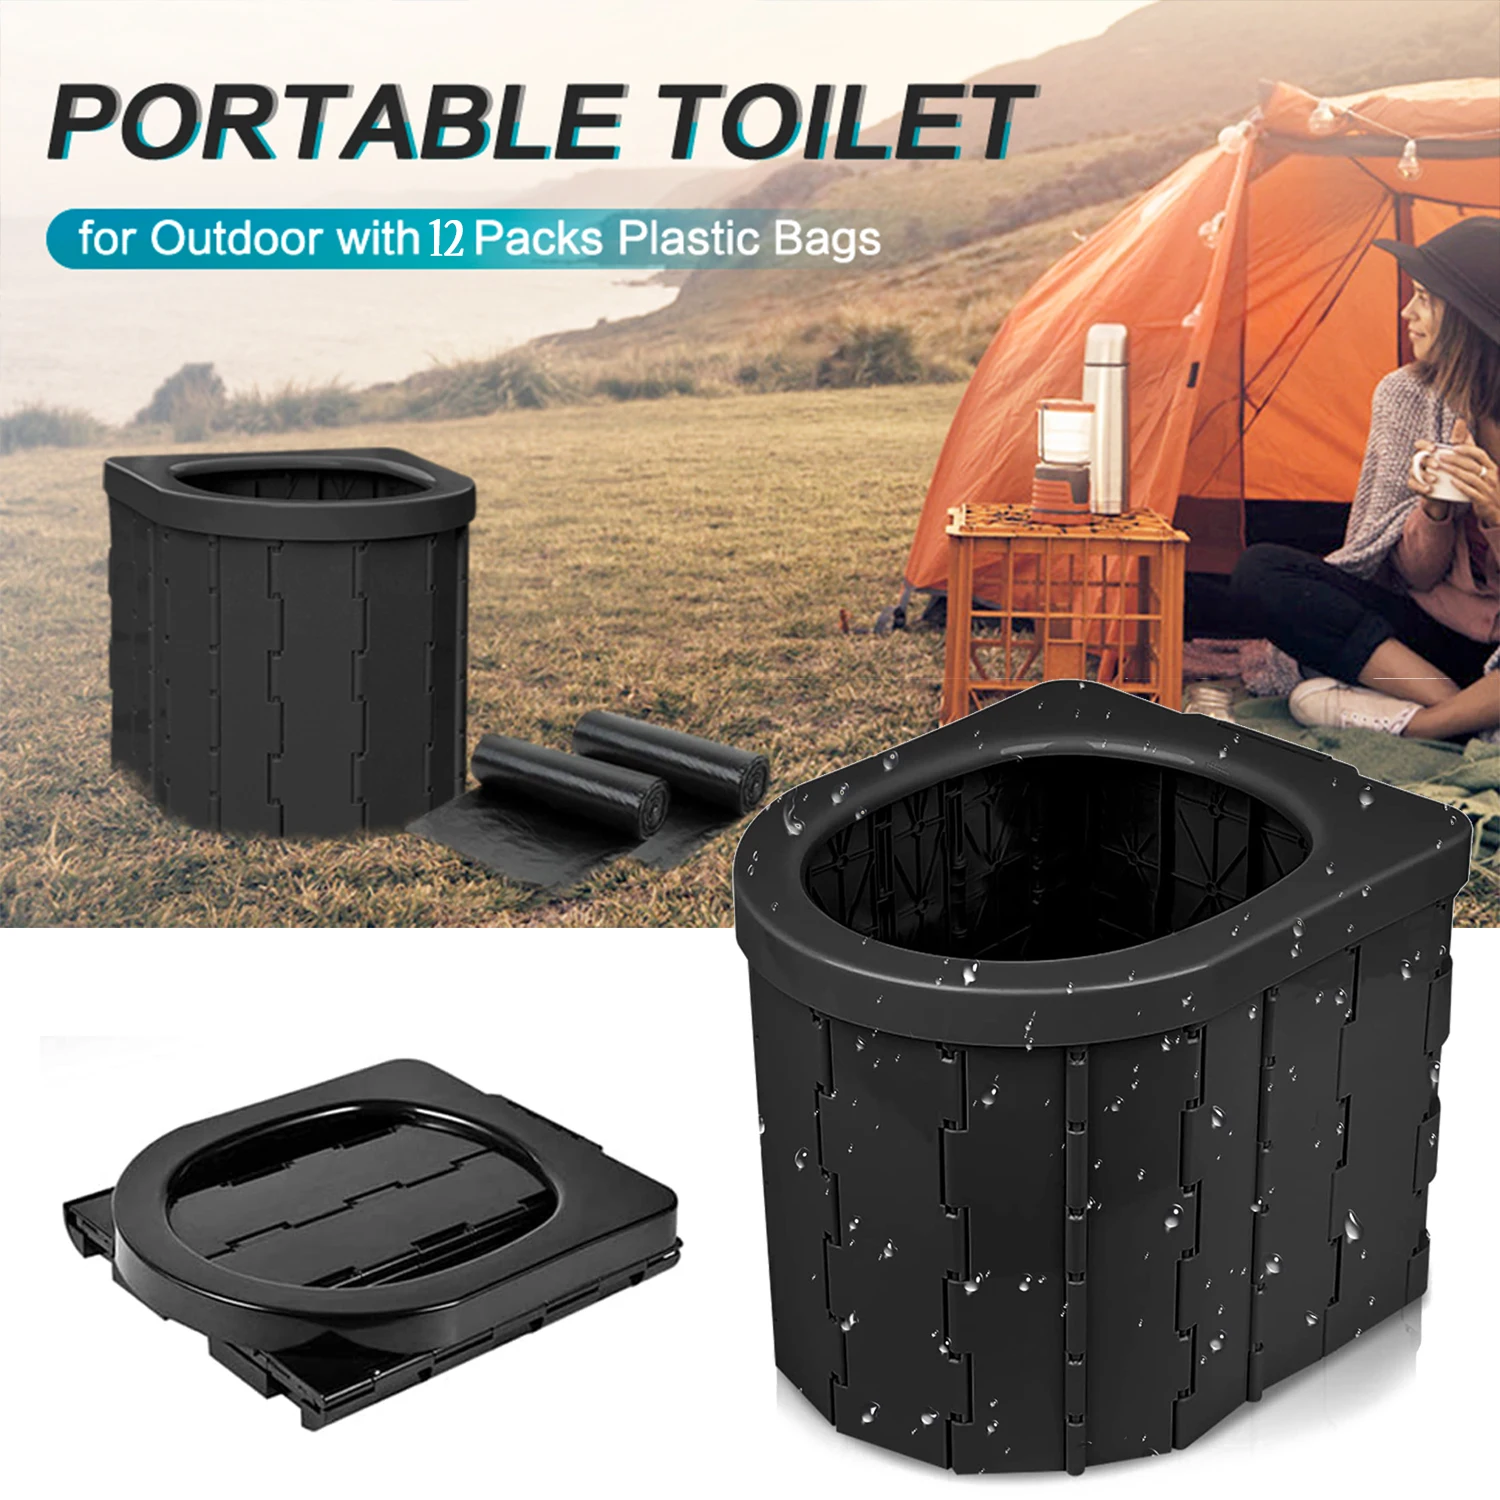 ABS Plastic Portable Outdoor Folding Toilet Car Travel Emergency Integrated Toilet Self-driving Tour Outdoor Camping Toilet